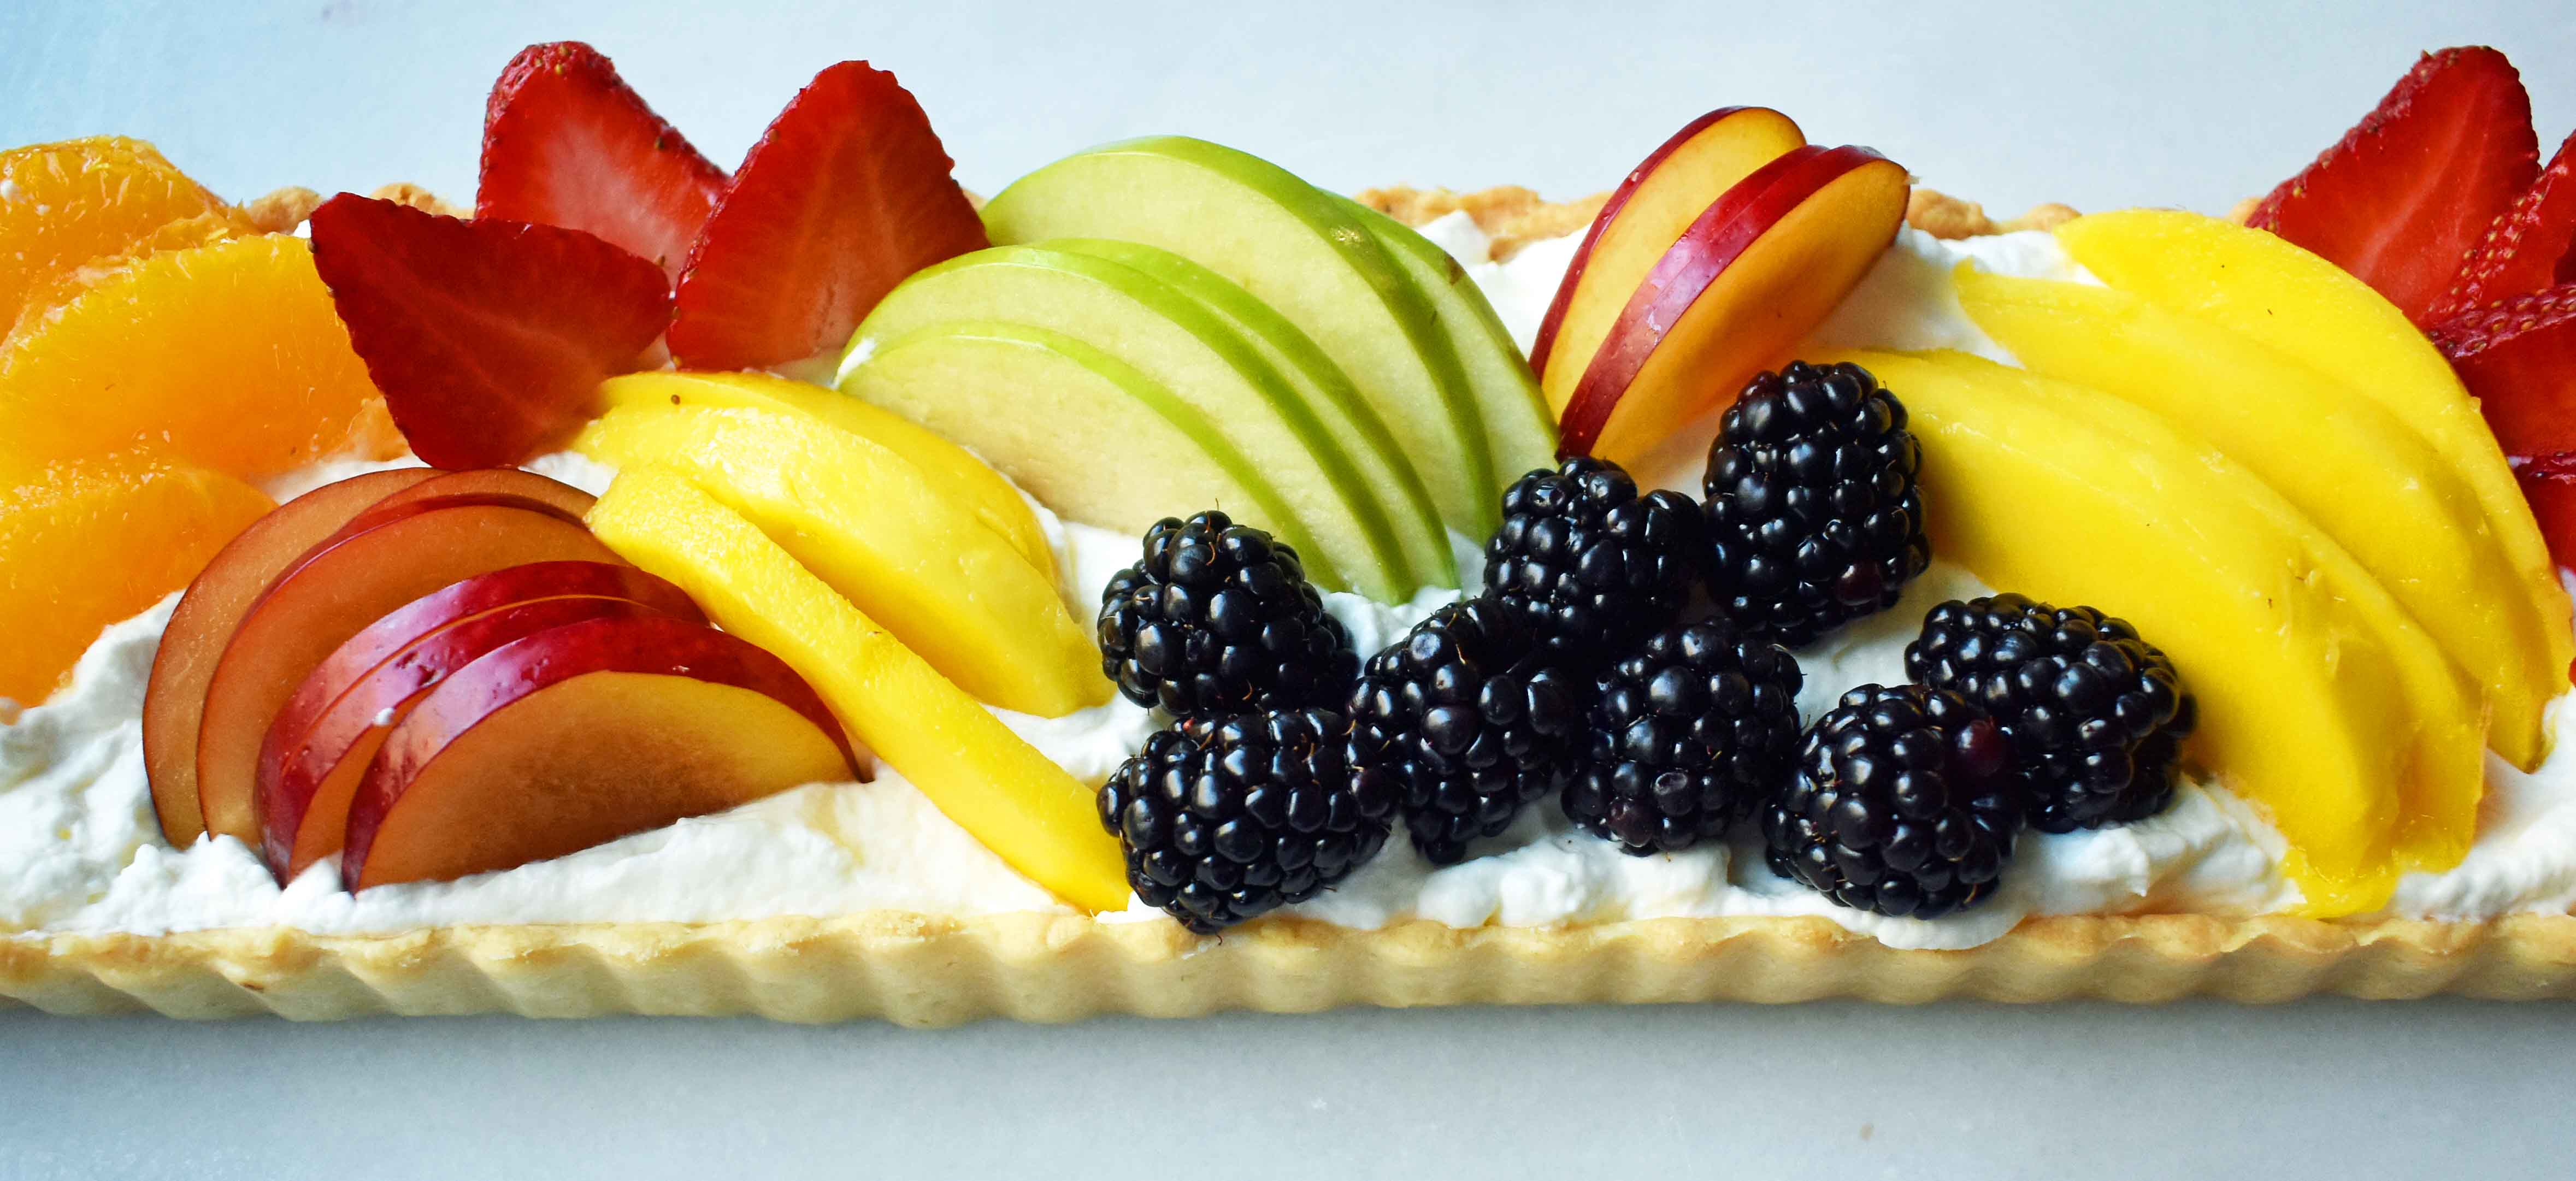 Fresh Fruit Tart with Vanilla Pastry Cream. Buttery, flaky tart filled with homemade vanilla bean custard and topped with fresh fruits. A classic French dessert that is a huge crowd pleaser. www.modernhoney.com